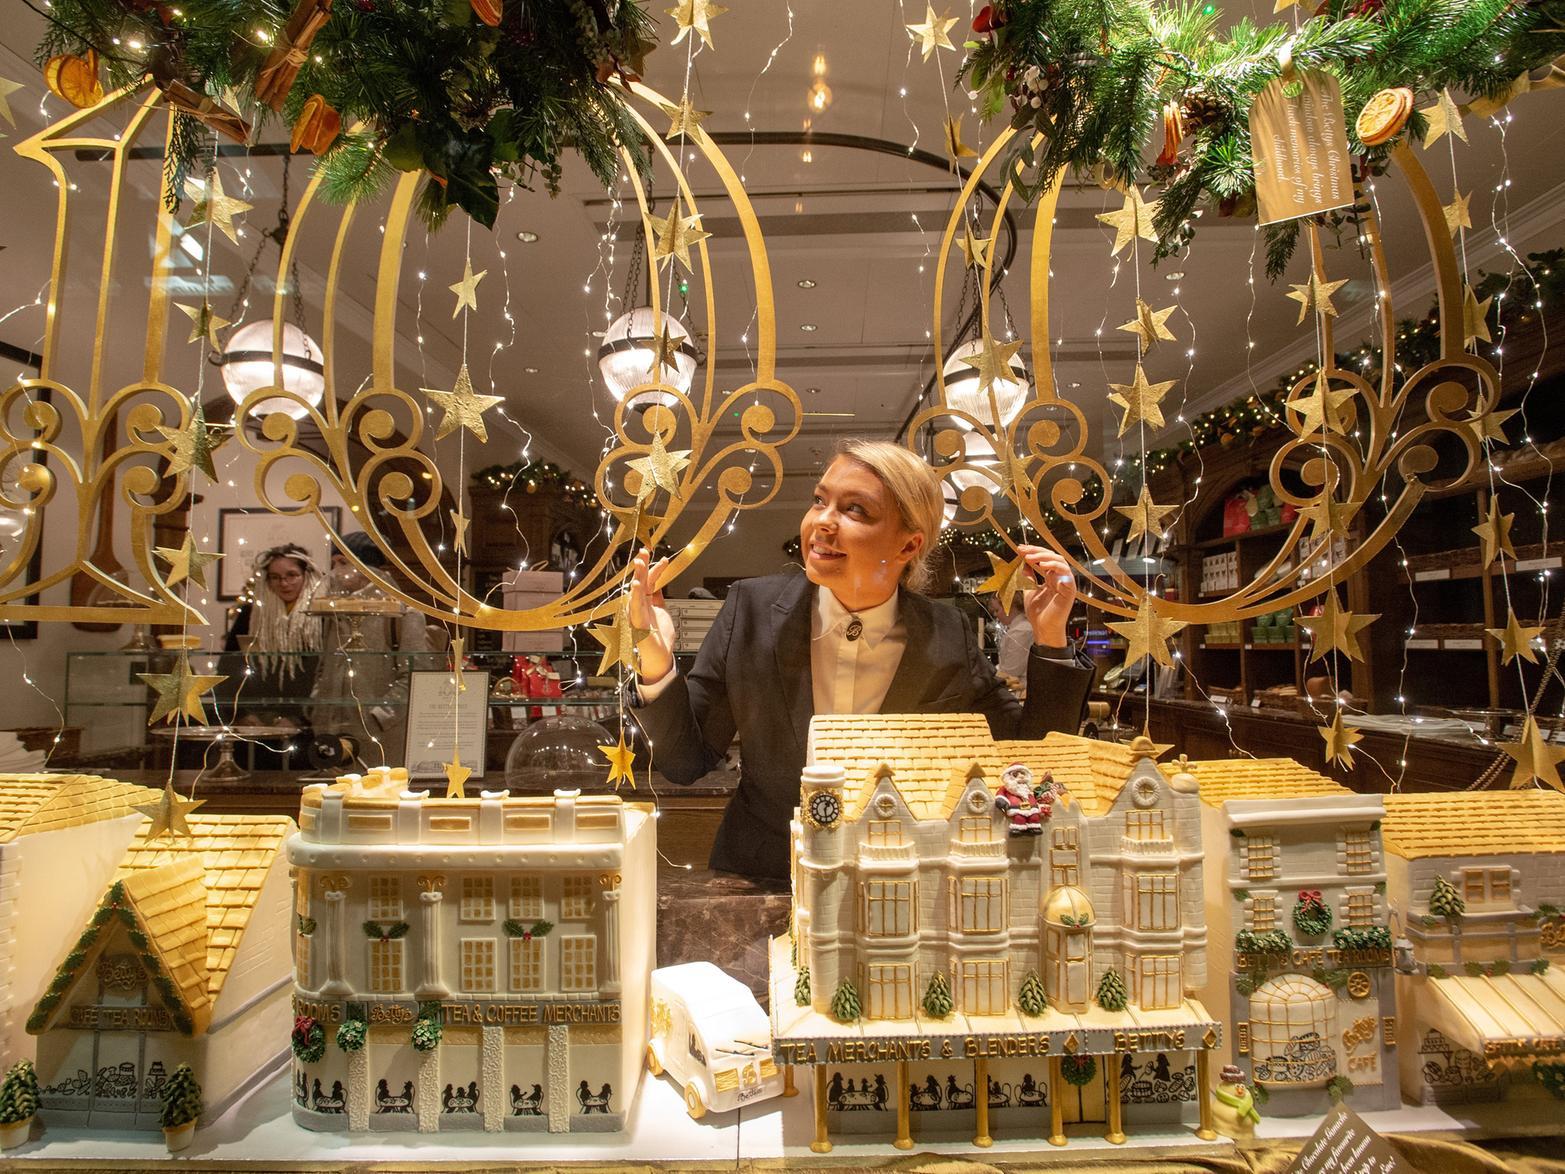 This year marks 100 years of Bettys, and the window is beautifully decorated for the festive season. Go and take a look at the glorious display,